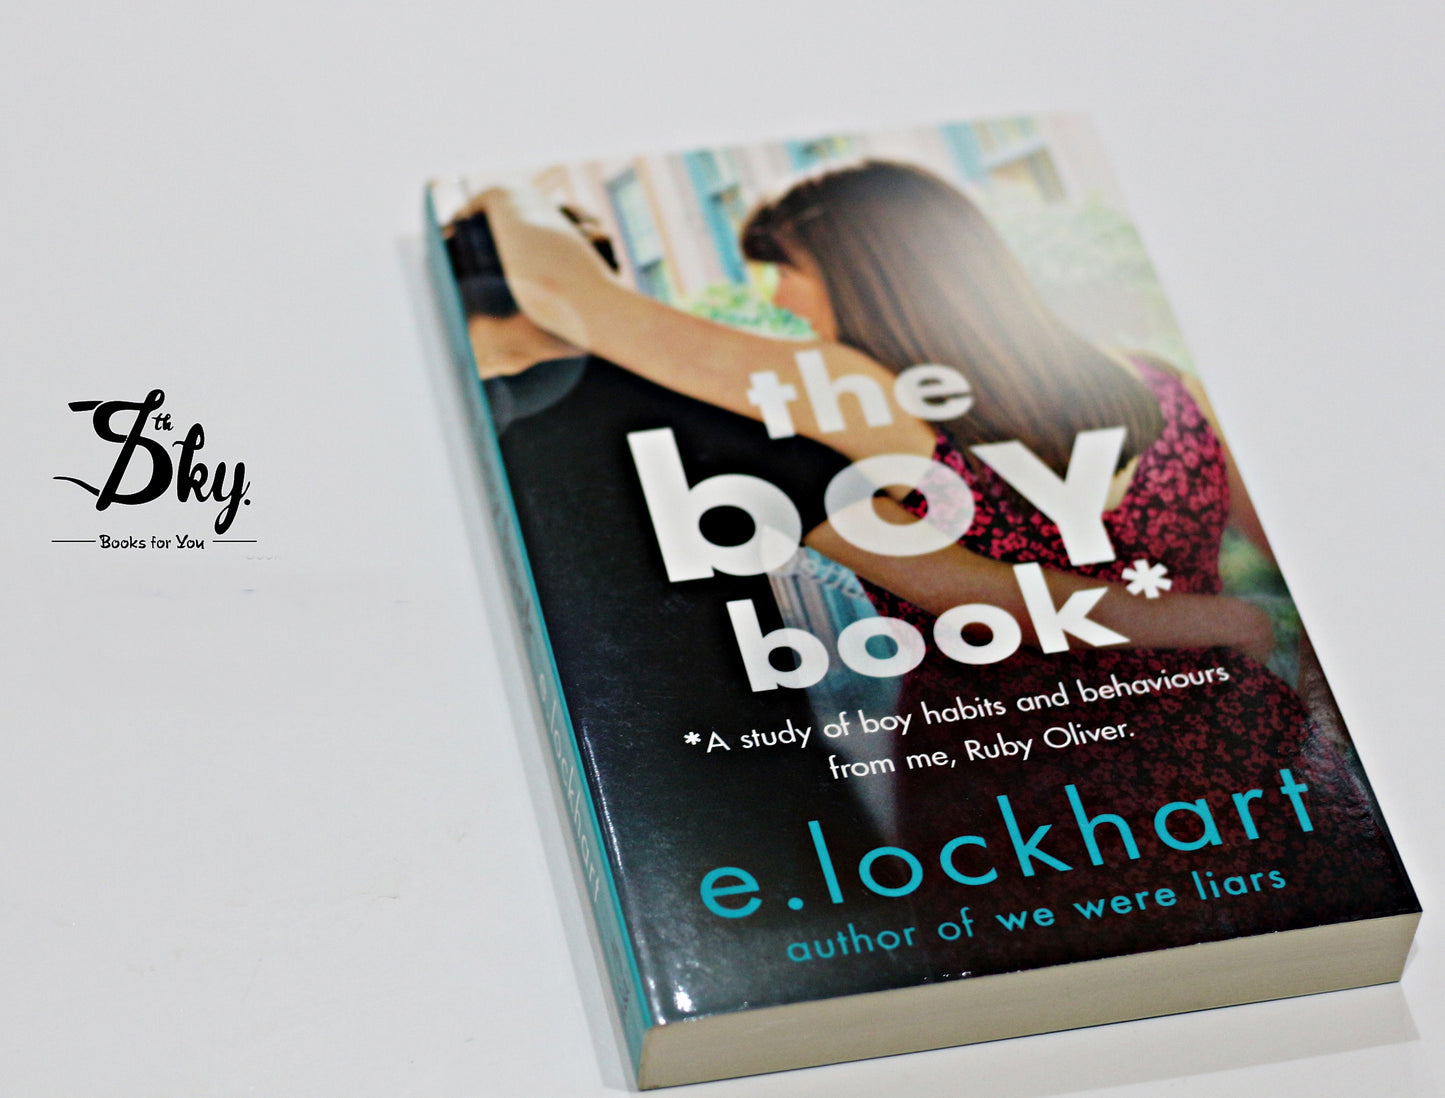 The Boy Book: A Study of Habits and Behaviors From me, Ruby Oliver.